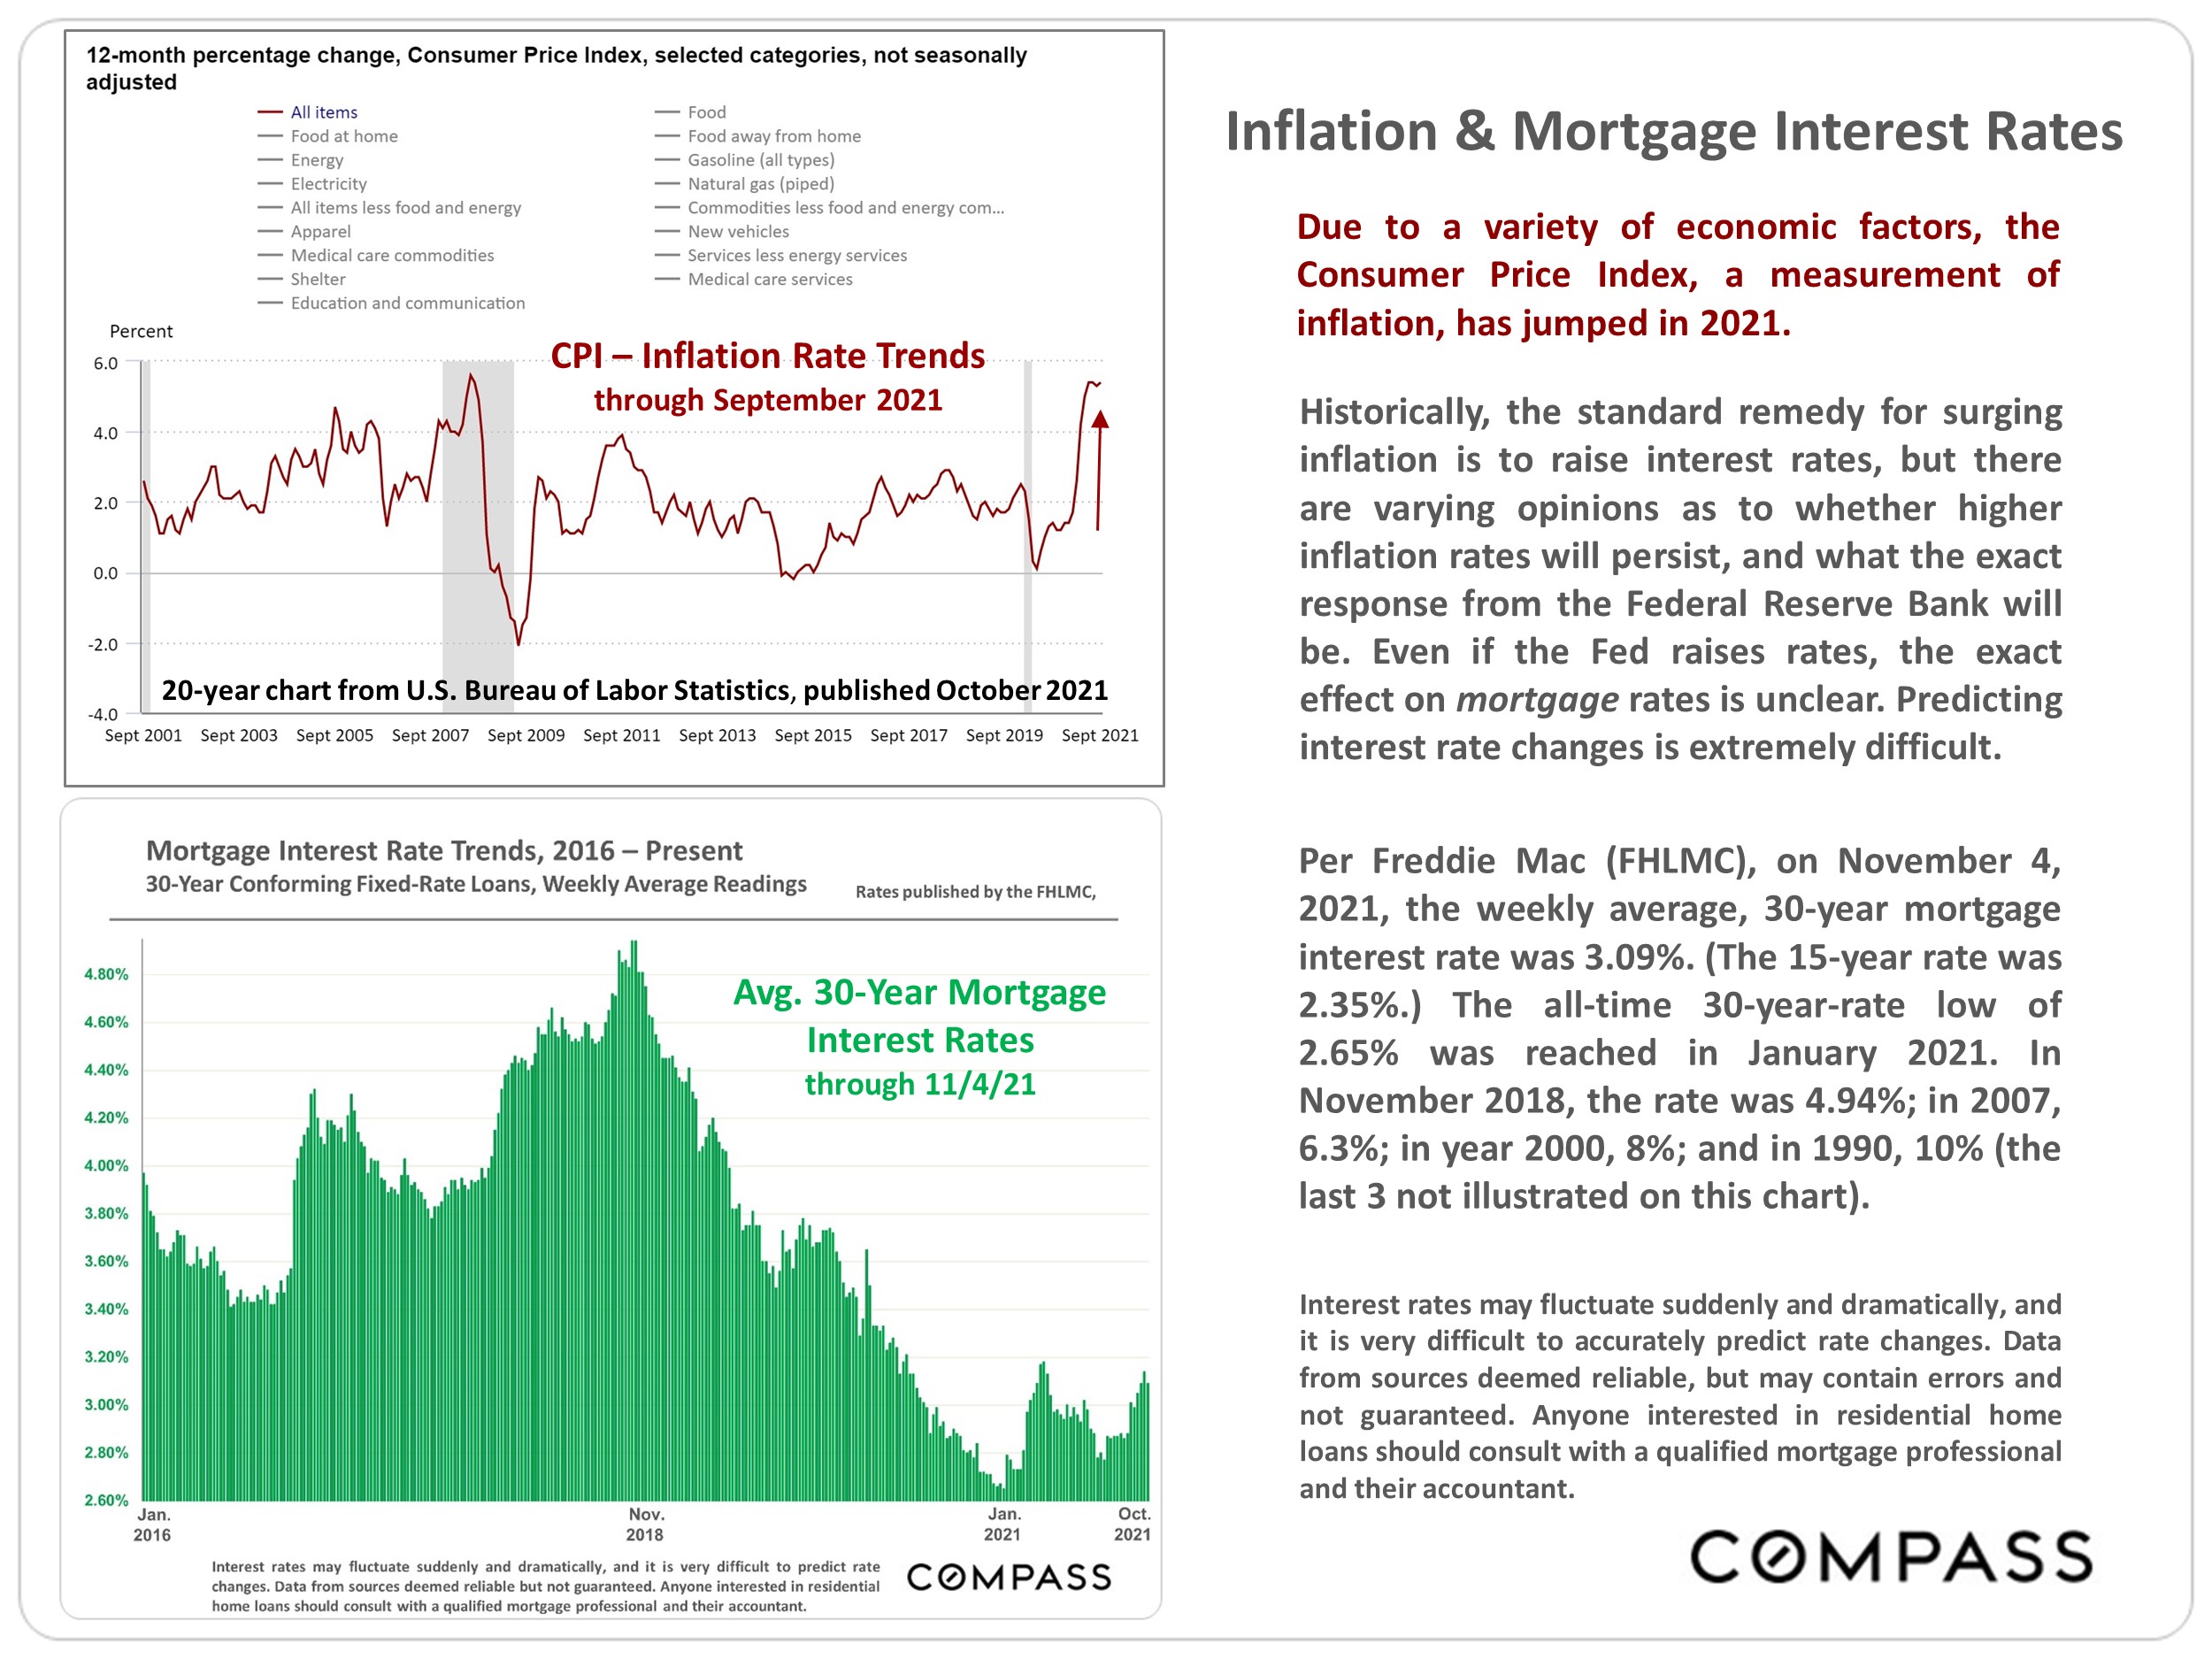 text discussing the inflation & mortgage interest rates with a graph of the 12 month percentage change of the Consumer Price Index and a graph of the mortgage interest rate trends